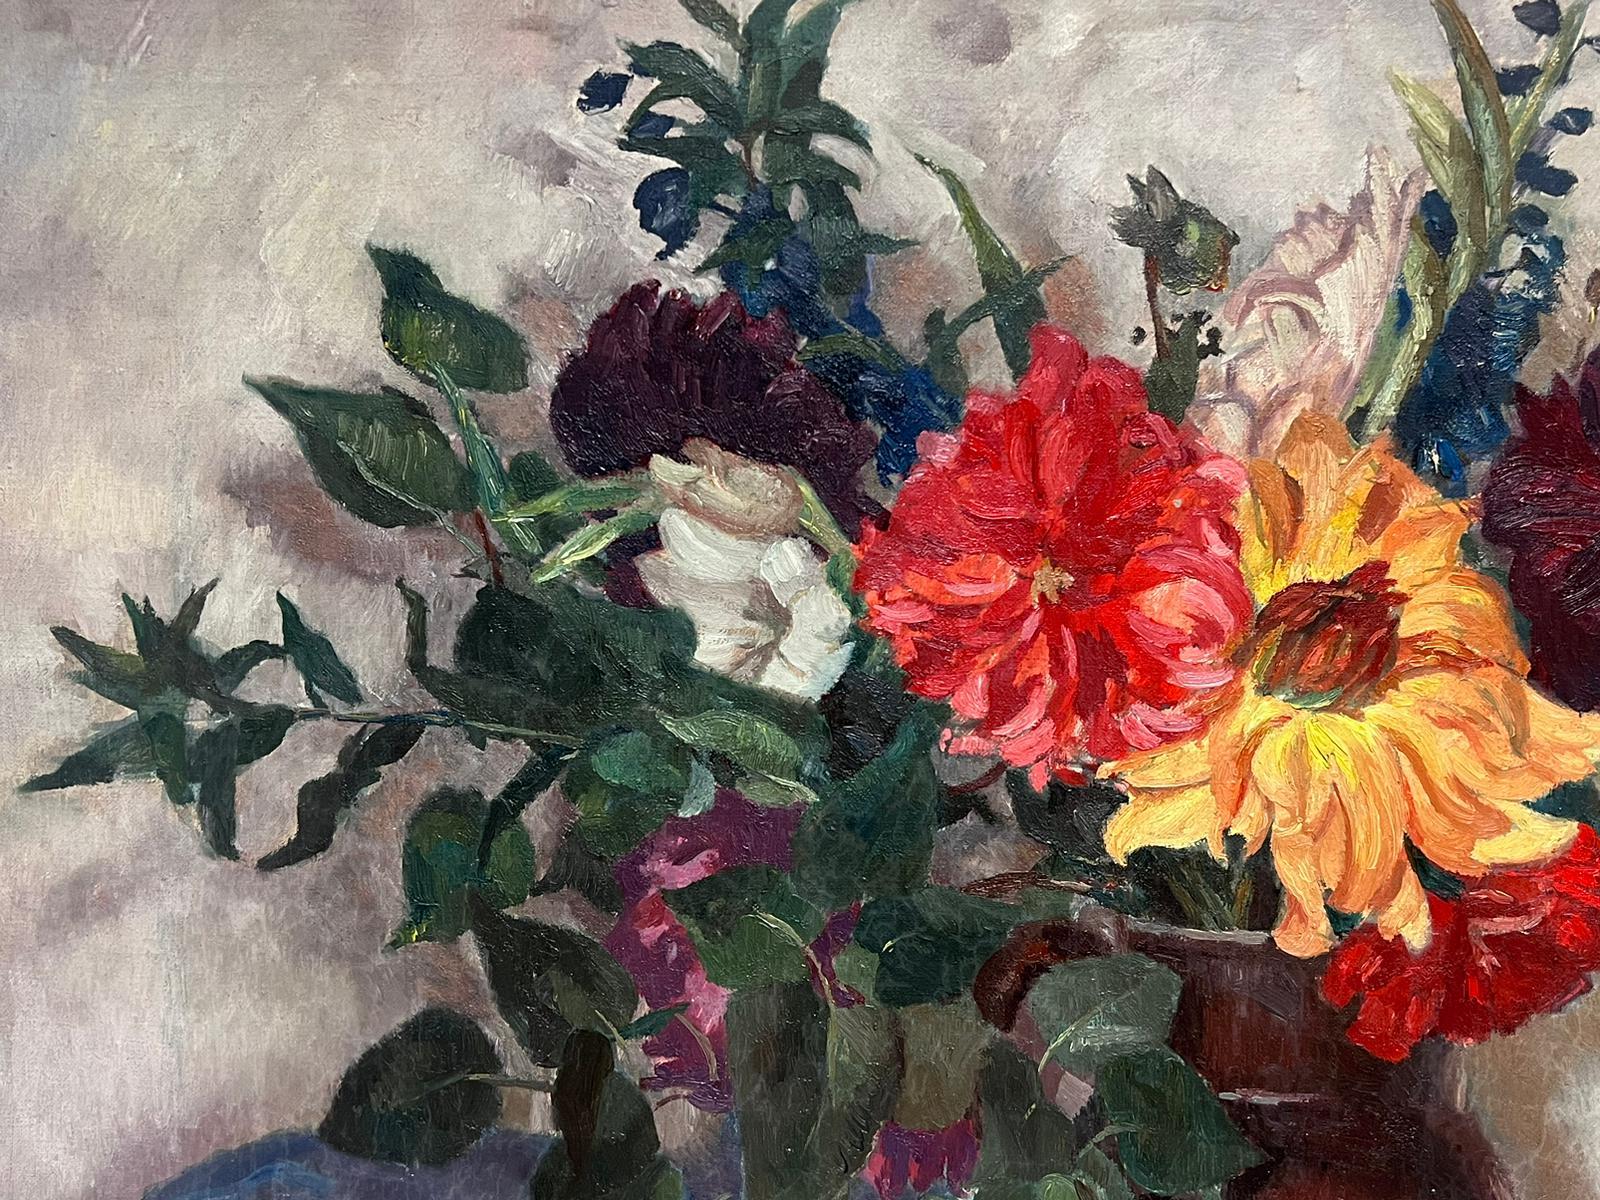 Floral Still Life
French Impressionist, circa 1930's
by Lucien Martial, signed 
oil on canvas, unframed
canvas: 24 x 32 inches
provenance: private collection, France
condition: very good and sound condition